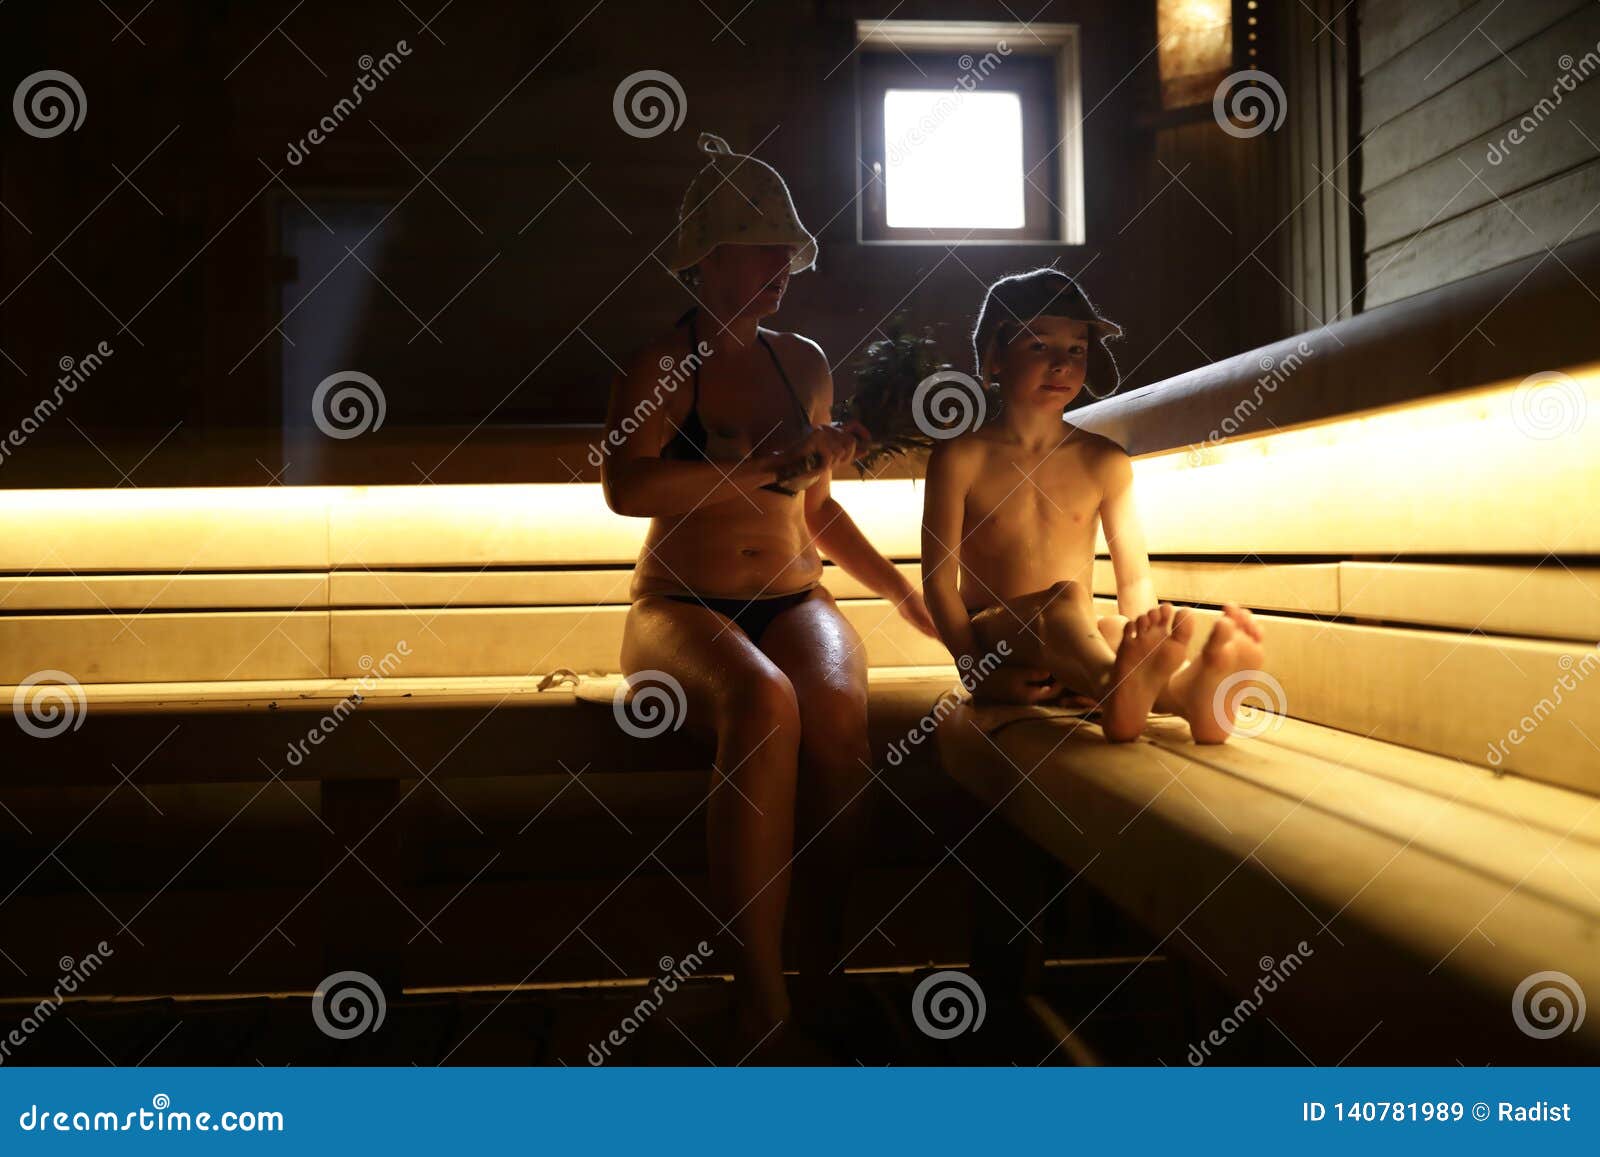 The banya steam bath is very important to russians and its фото 70